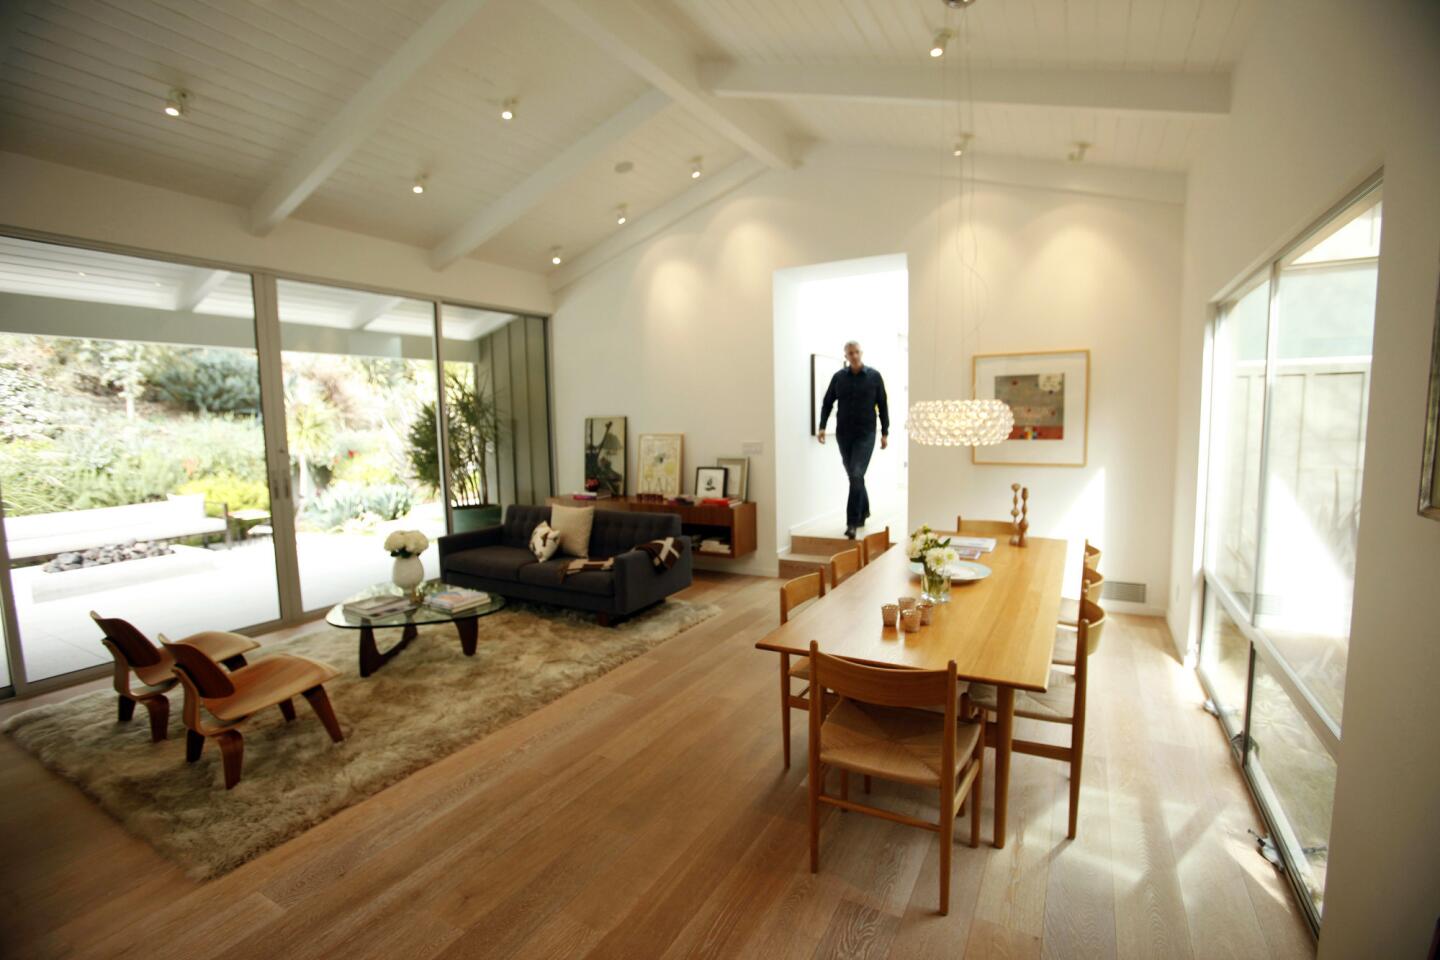 Architect David Montalba of Montalba Architects in Santa Monica walks through the home of Betsy Everitt and Christopher Schilling in Brentwood, a ranch house that he redesigned as a clean, modern indoor-outdoor retreat.